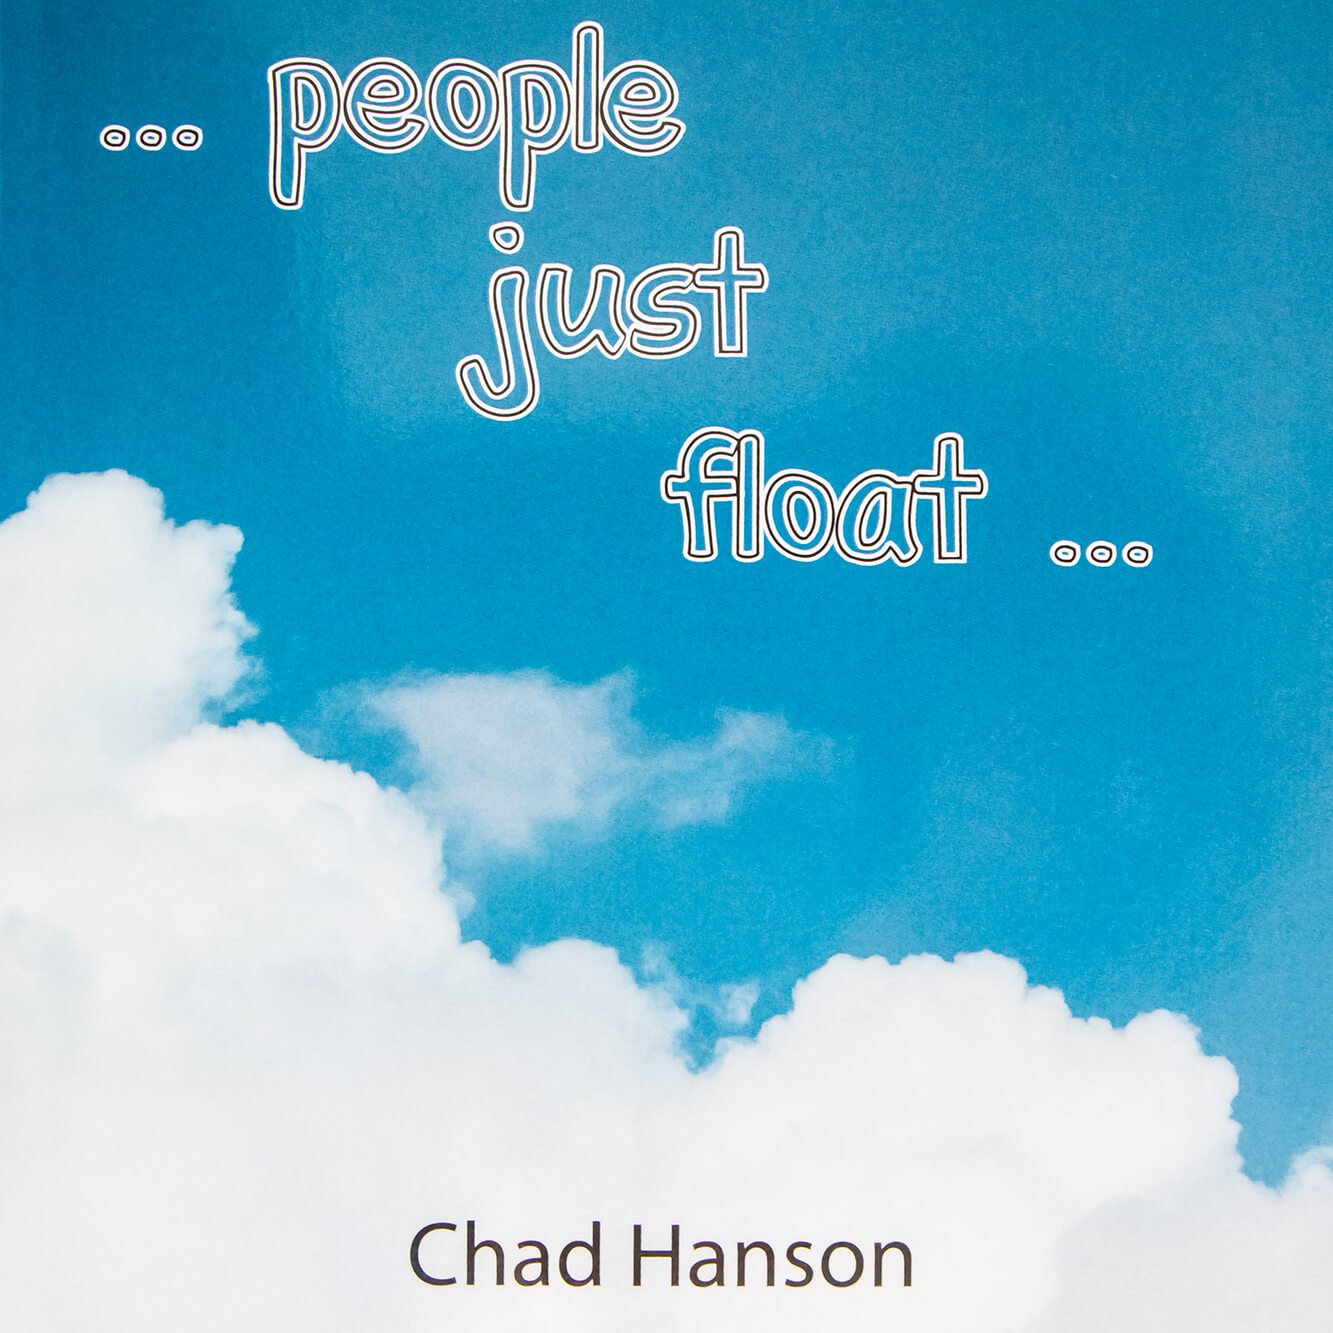 Image of Chad Hanson's book "People Just Float."